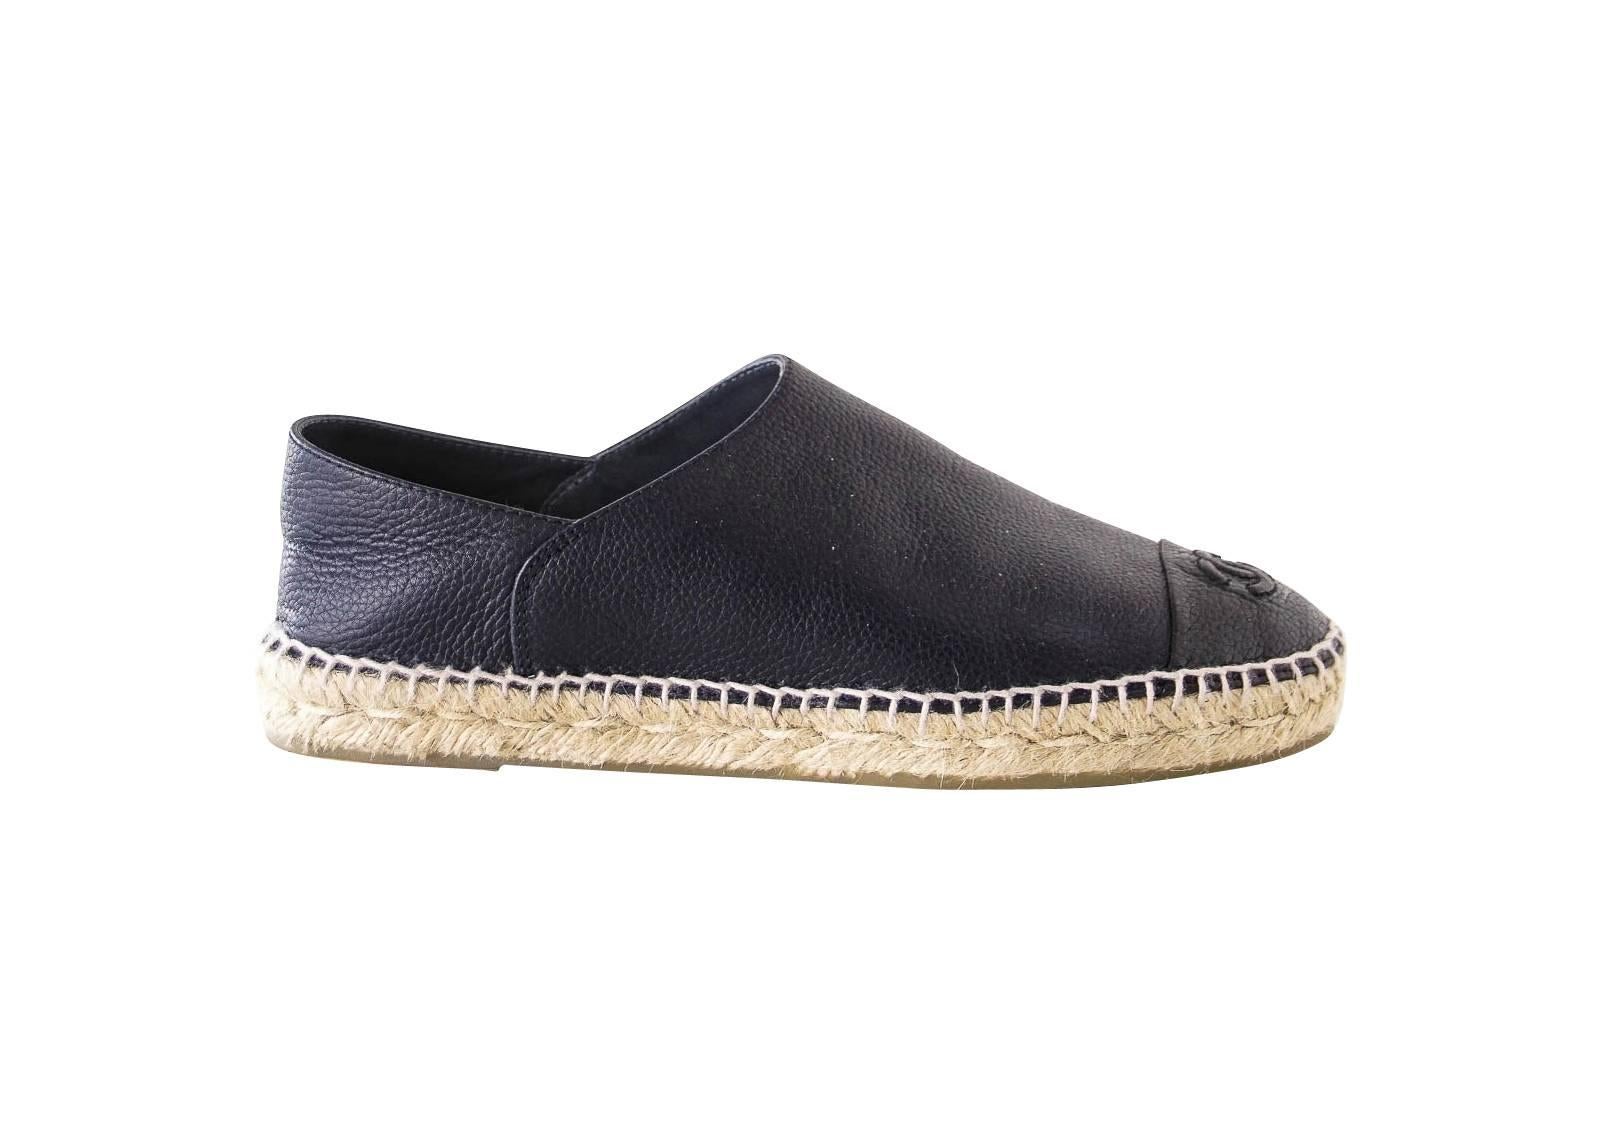 Black Chanel Shoe Espadrilles Cambon Loafers Dark Navy Leather 39 / 9  